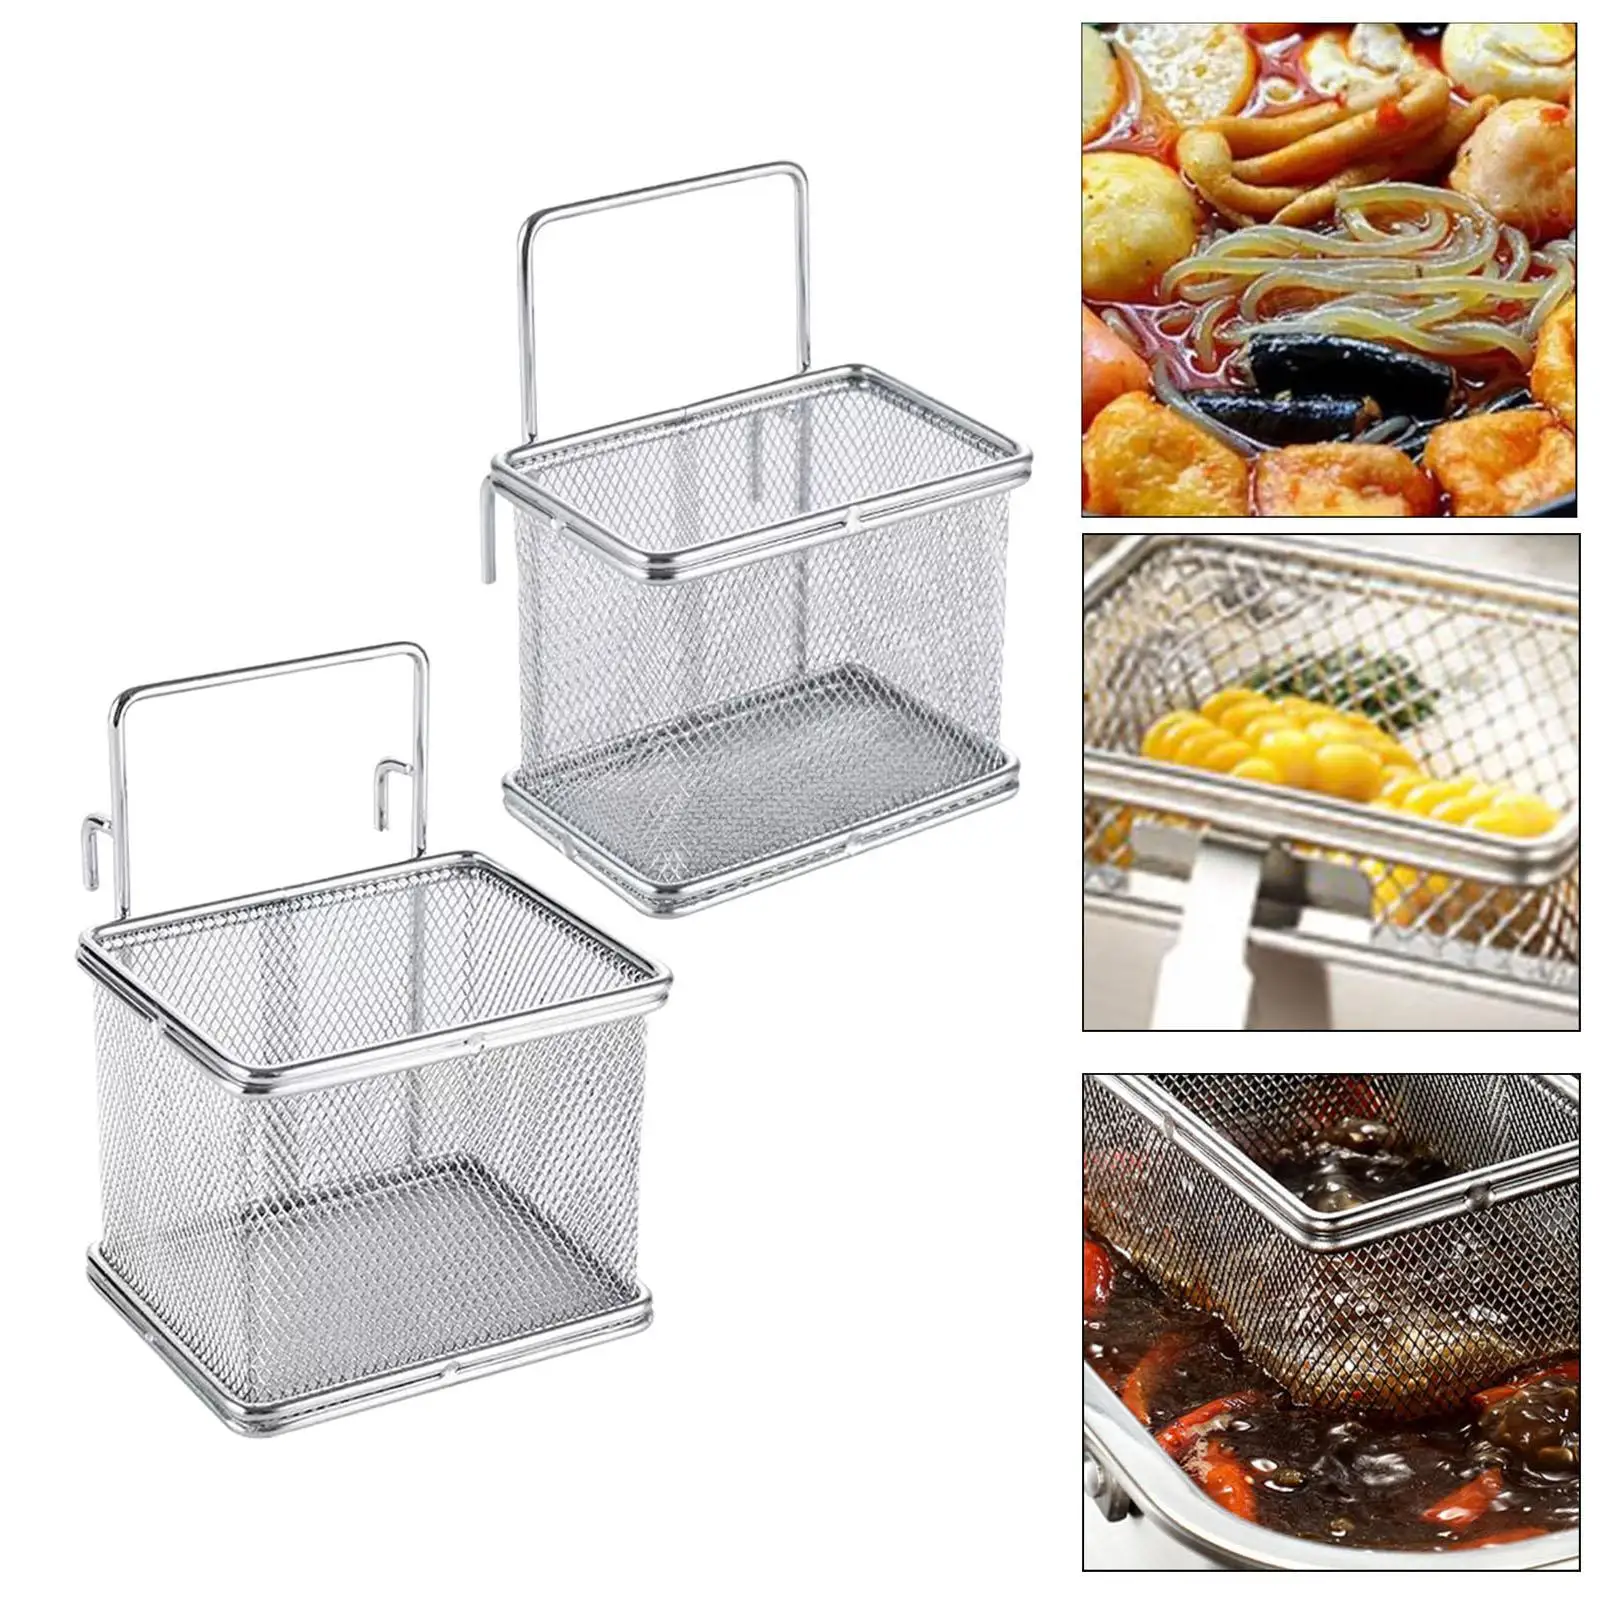 Stainless Steel Mini French Fries Basket Fried Food Filter for Dumplings Frying